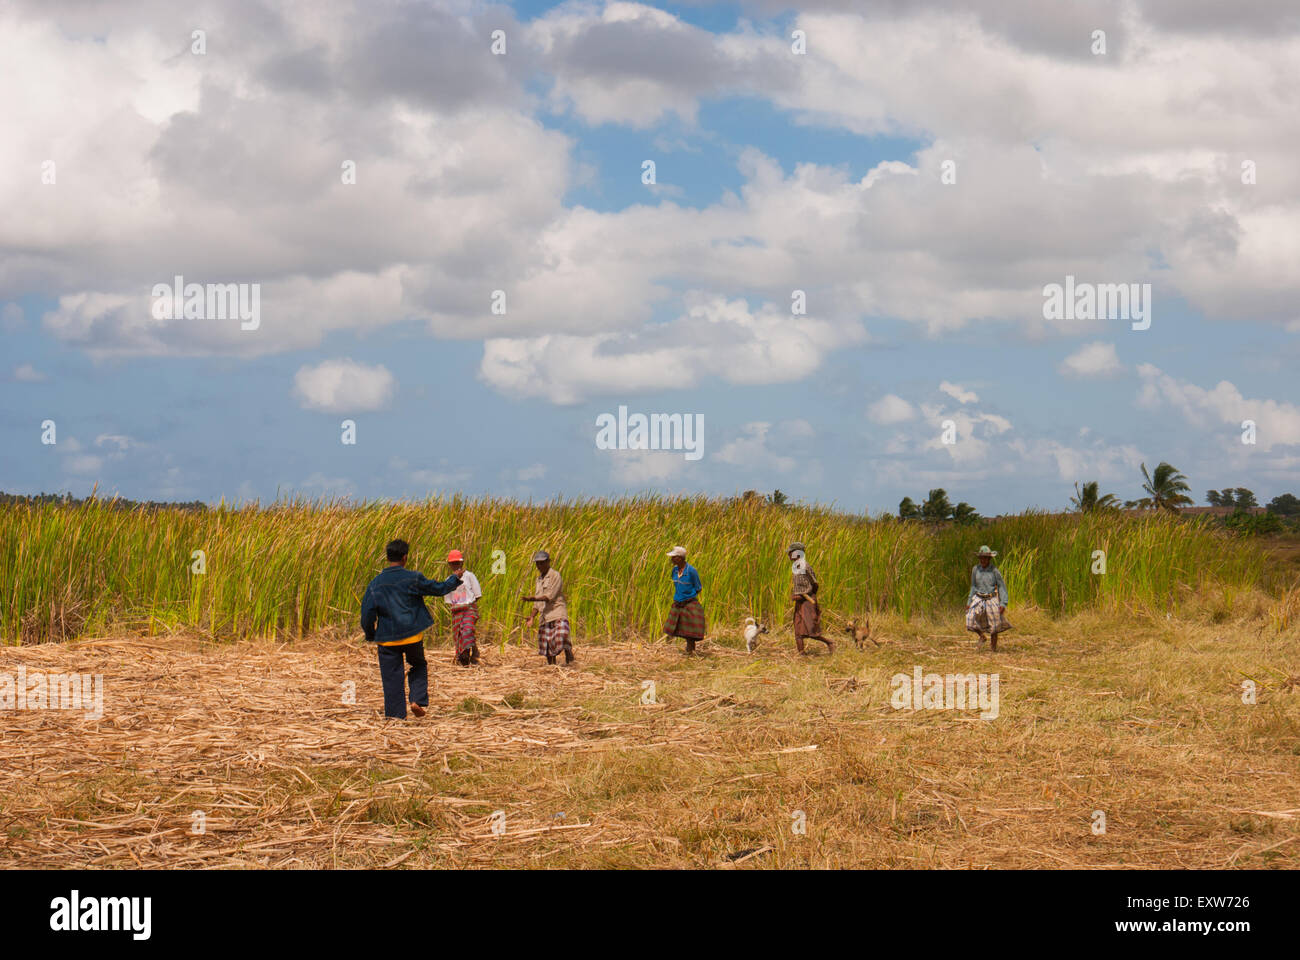 A member of organizing committee is directing villagers to take a different route as they are trying to watch a ceremonial event in Indonesia. Stock Photo